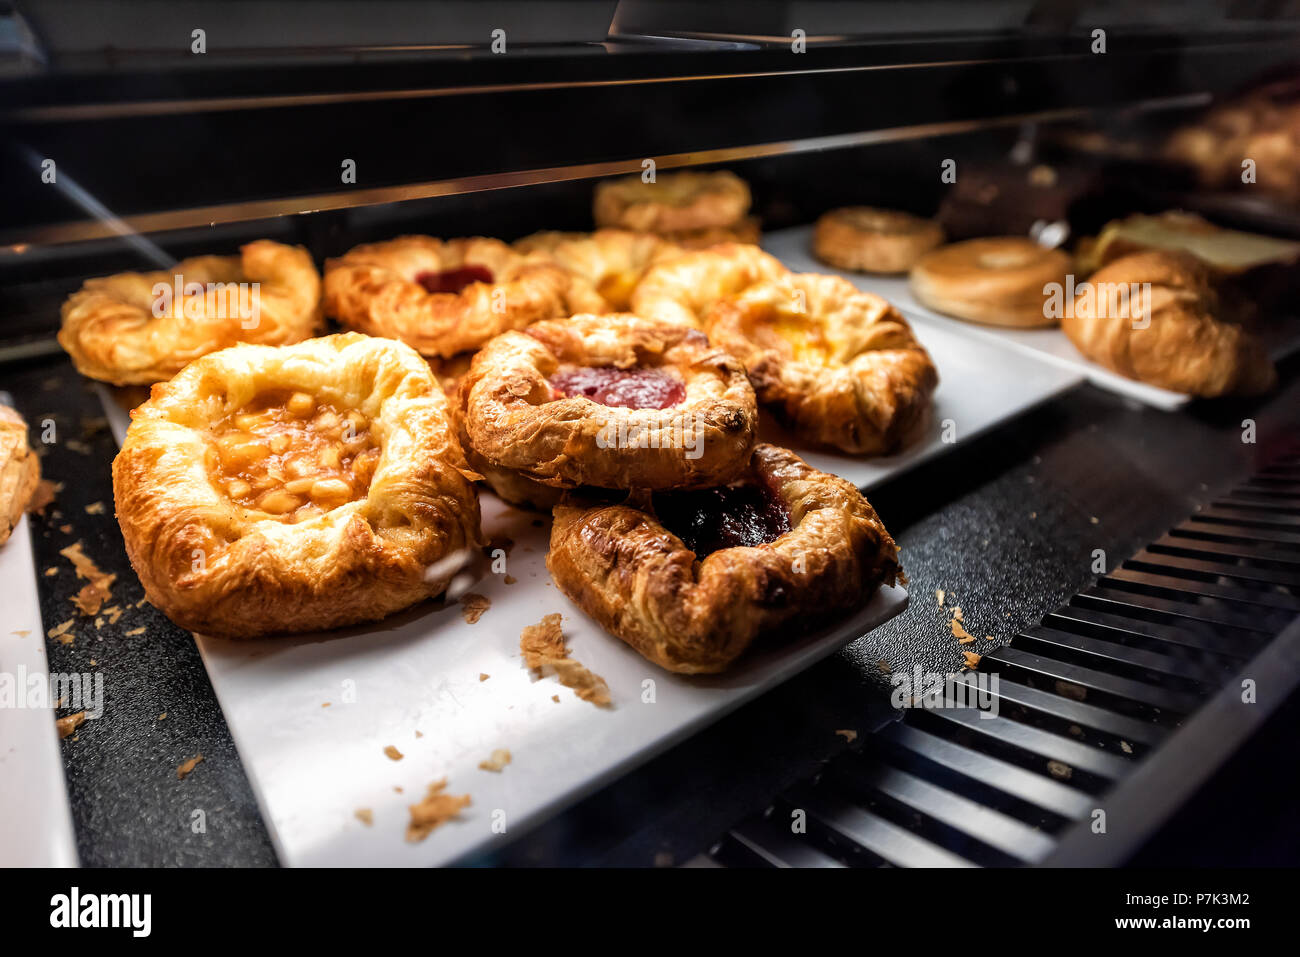 Closeup Of Many Yellow Dessert Berry Fruit Apple Baked Danish Pastries On Shelf Tray Display Desserts In Bakery Shop Cafe Store Dark Counter Stock Photo Alamy